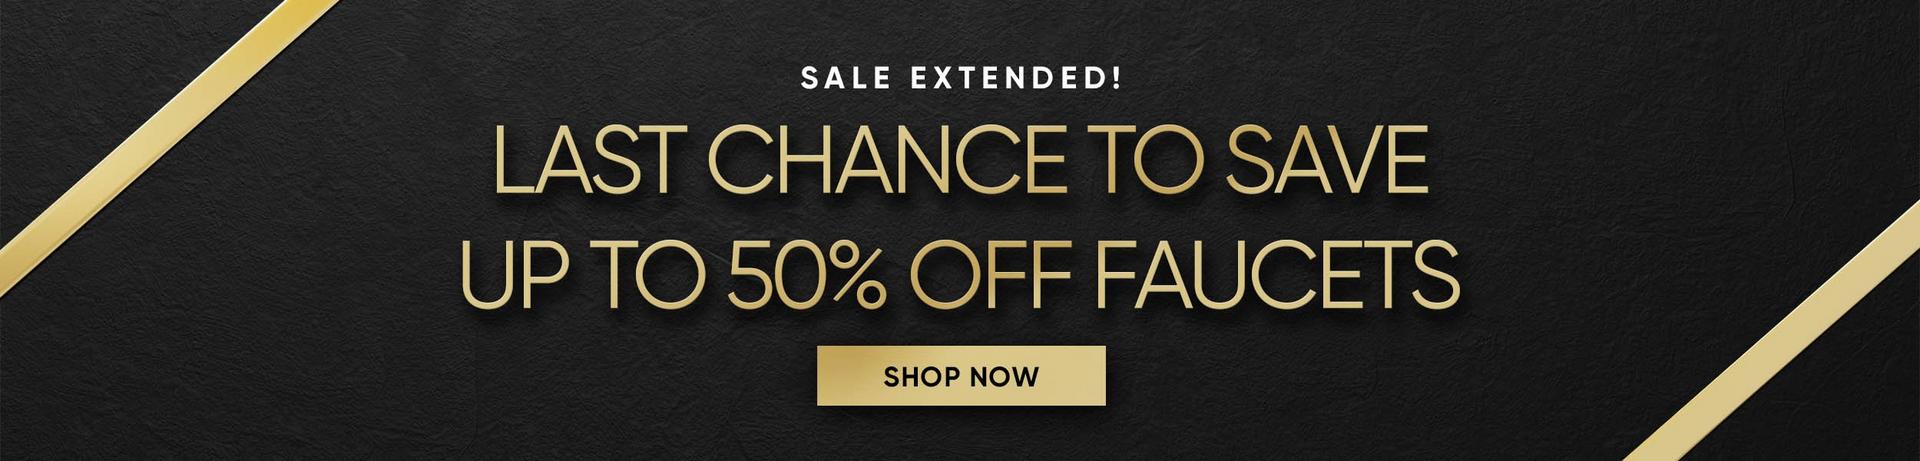 Last Chance to Save Up to 50% Off Faucets